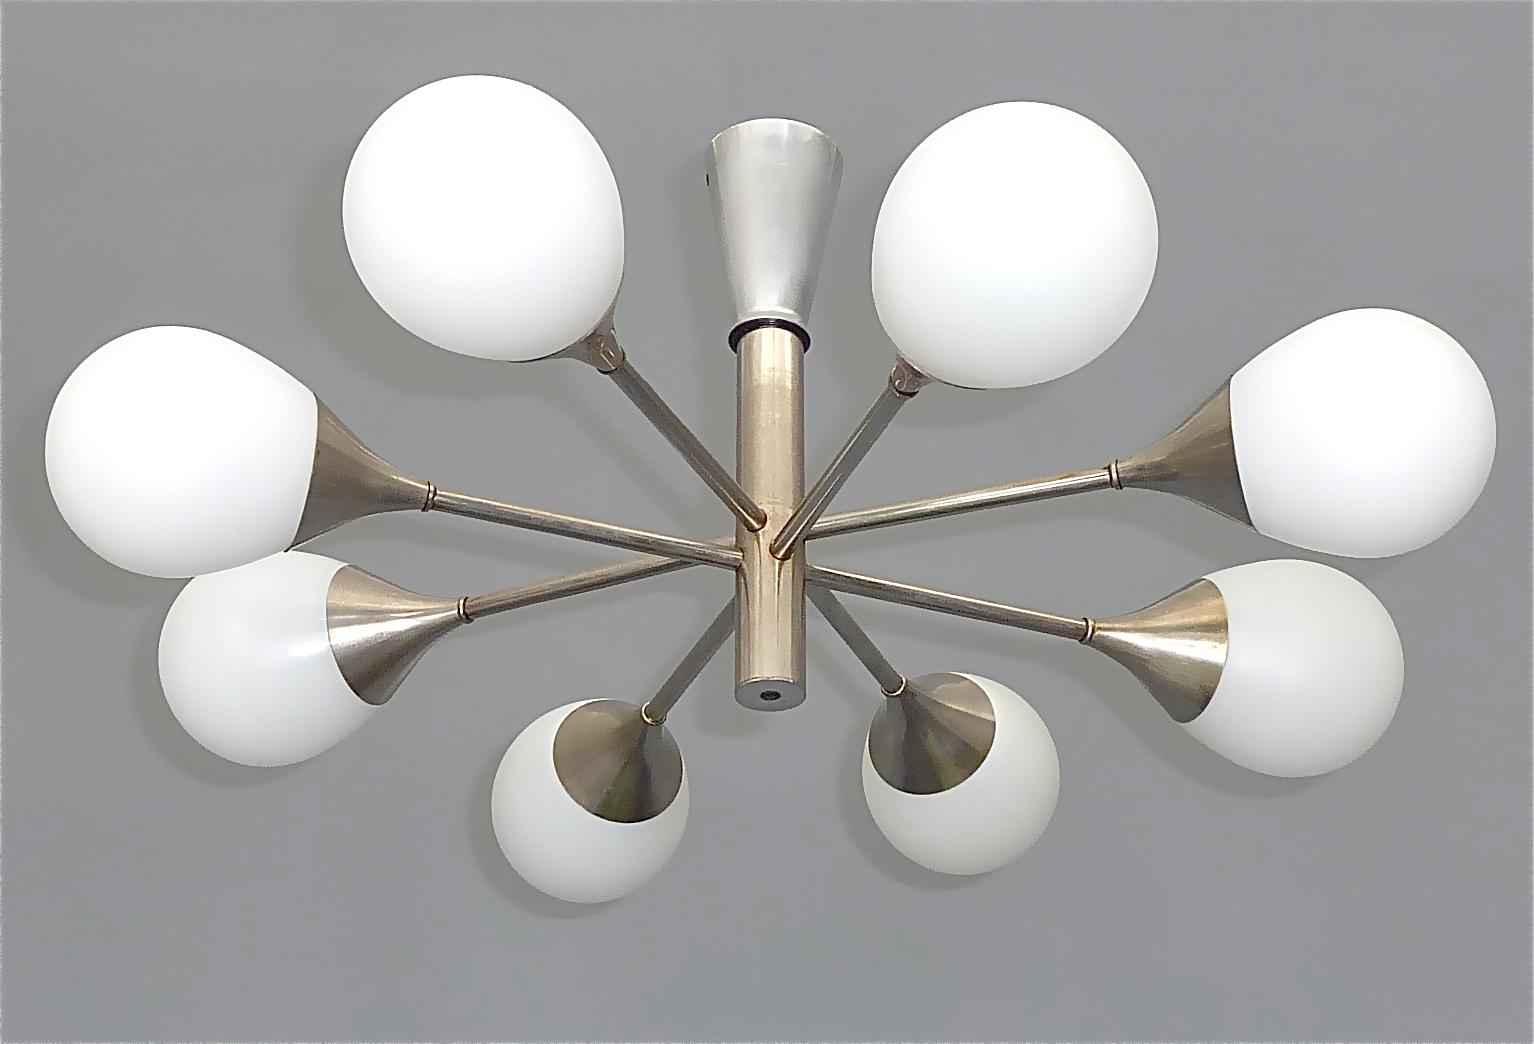 Cool 8 light Flush Mount sputnik chandelier, in the style of Angelo Lelii for Arredoluce and Stilnovo, designed and manufactured by the famous German lighting company Kaiser Leuchten, Germany around 1960s, which is well-known for the artist